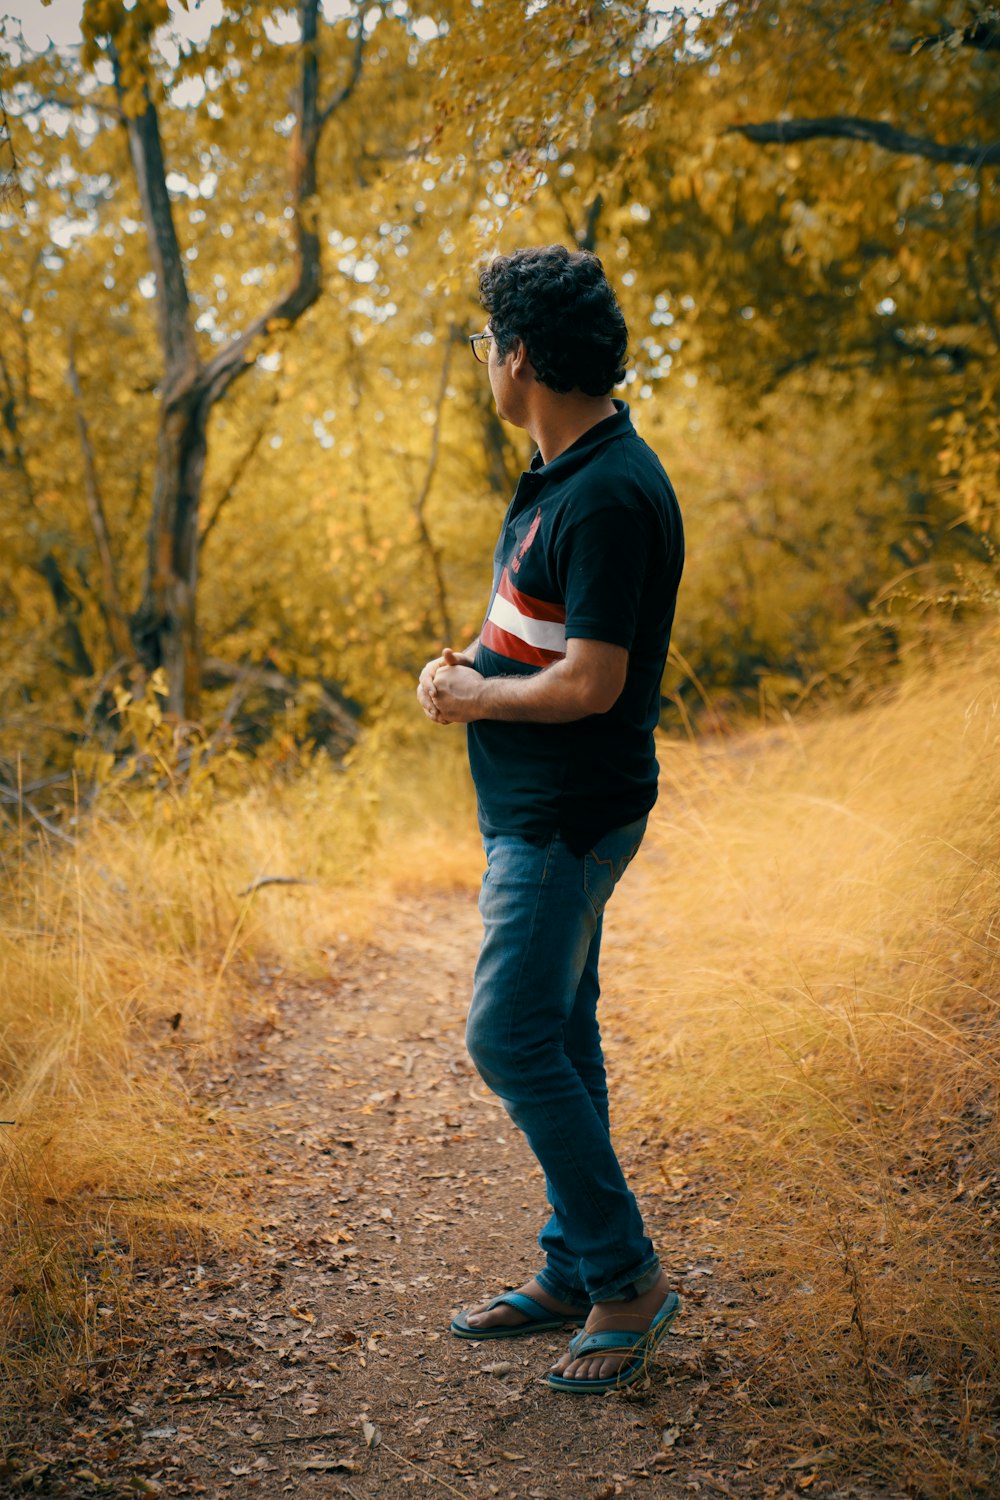 man in black shirt and blue denim jeans walking on dirt road during daytime